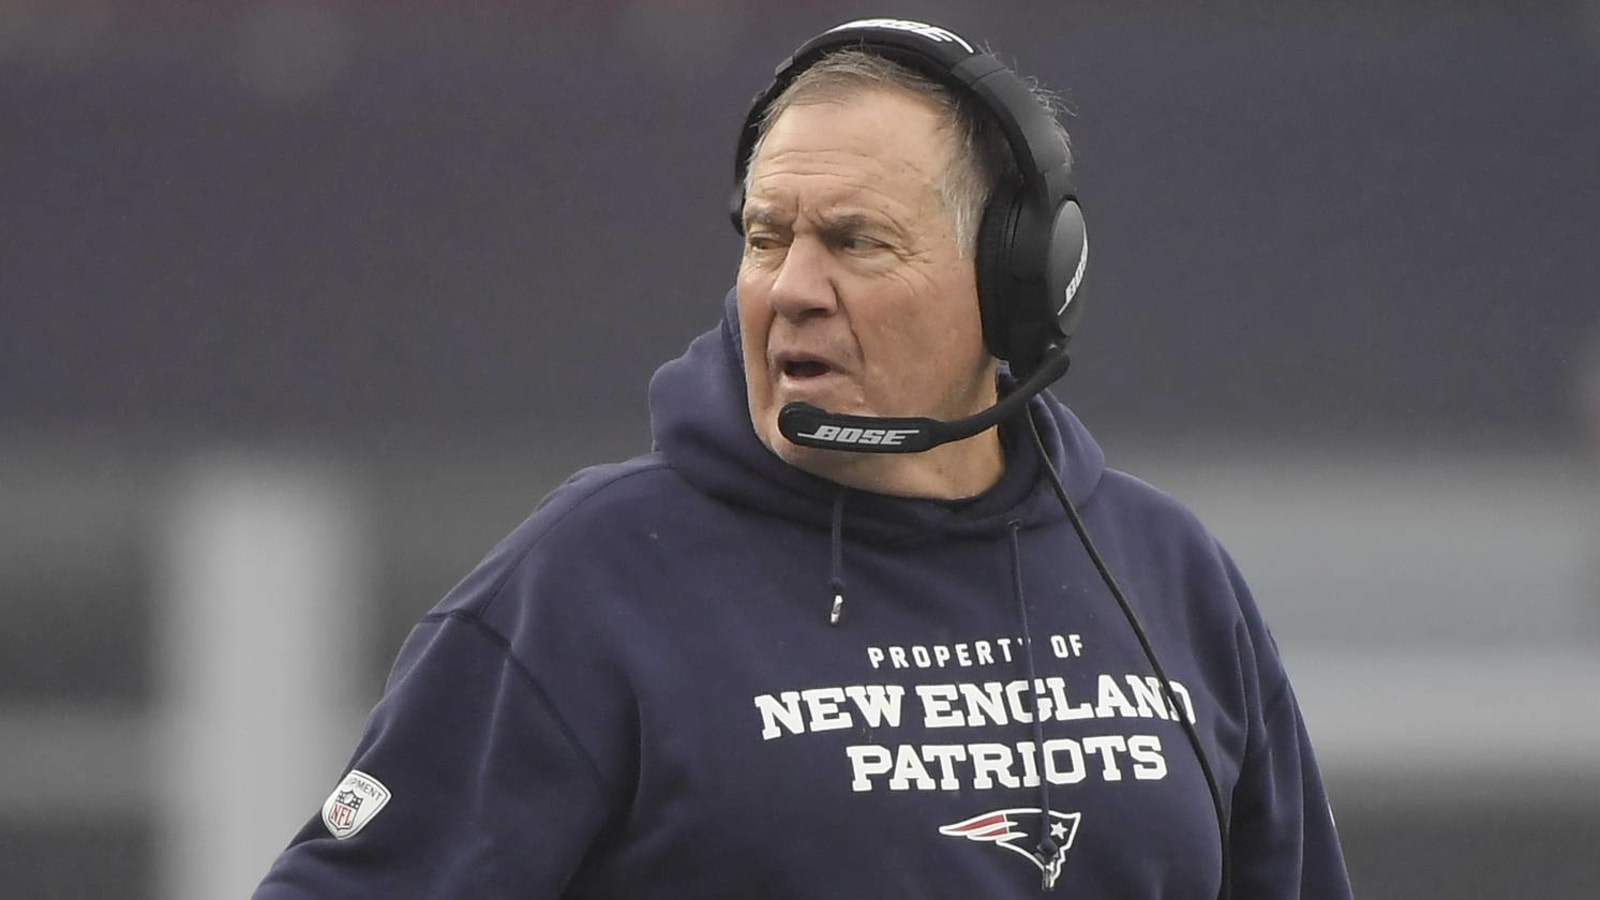 Belichick's texts to Brian Flores reveal Giants violated spirit of Rooney Rule